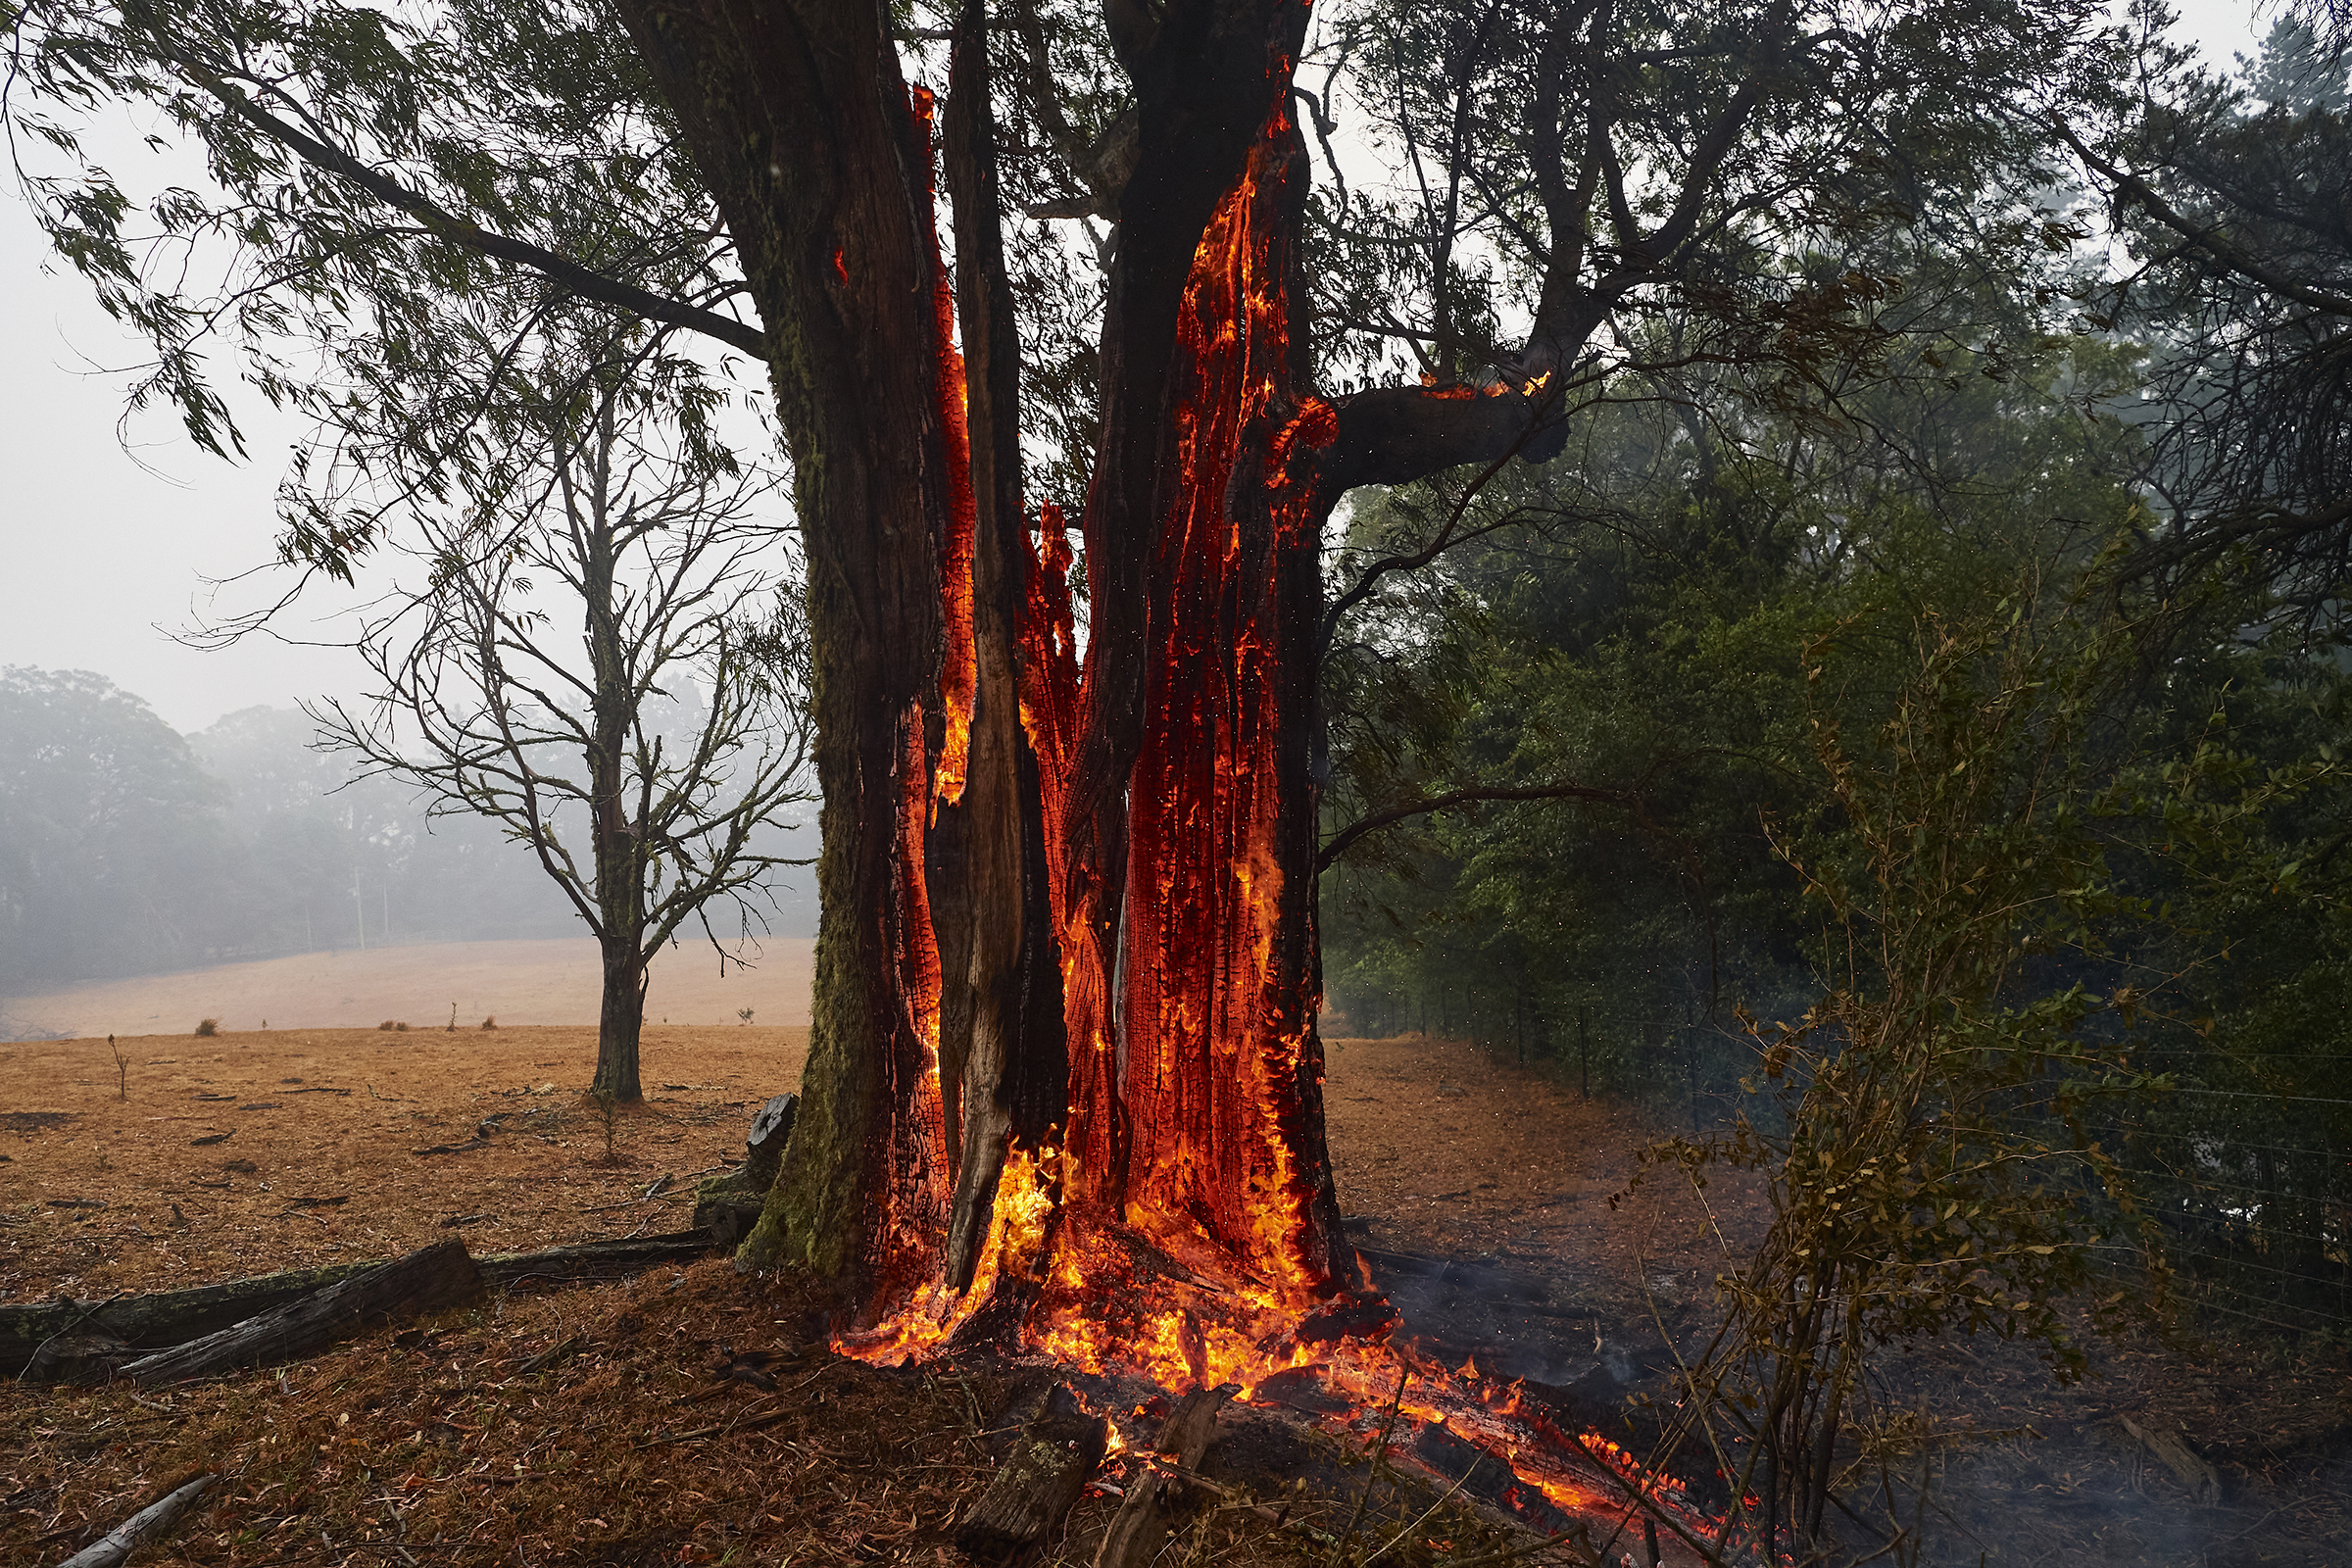 A tree burns from the inside out hours after the fire had passed on in Bundanoon, Australia on Jan. 5, 2020. (Brett Hemmings—Getty Images)